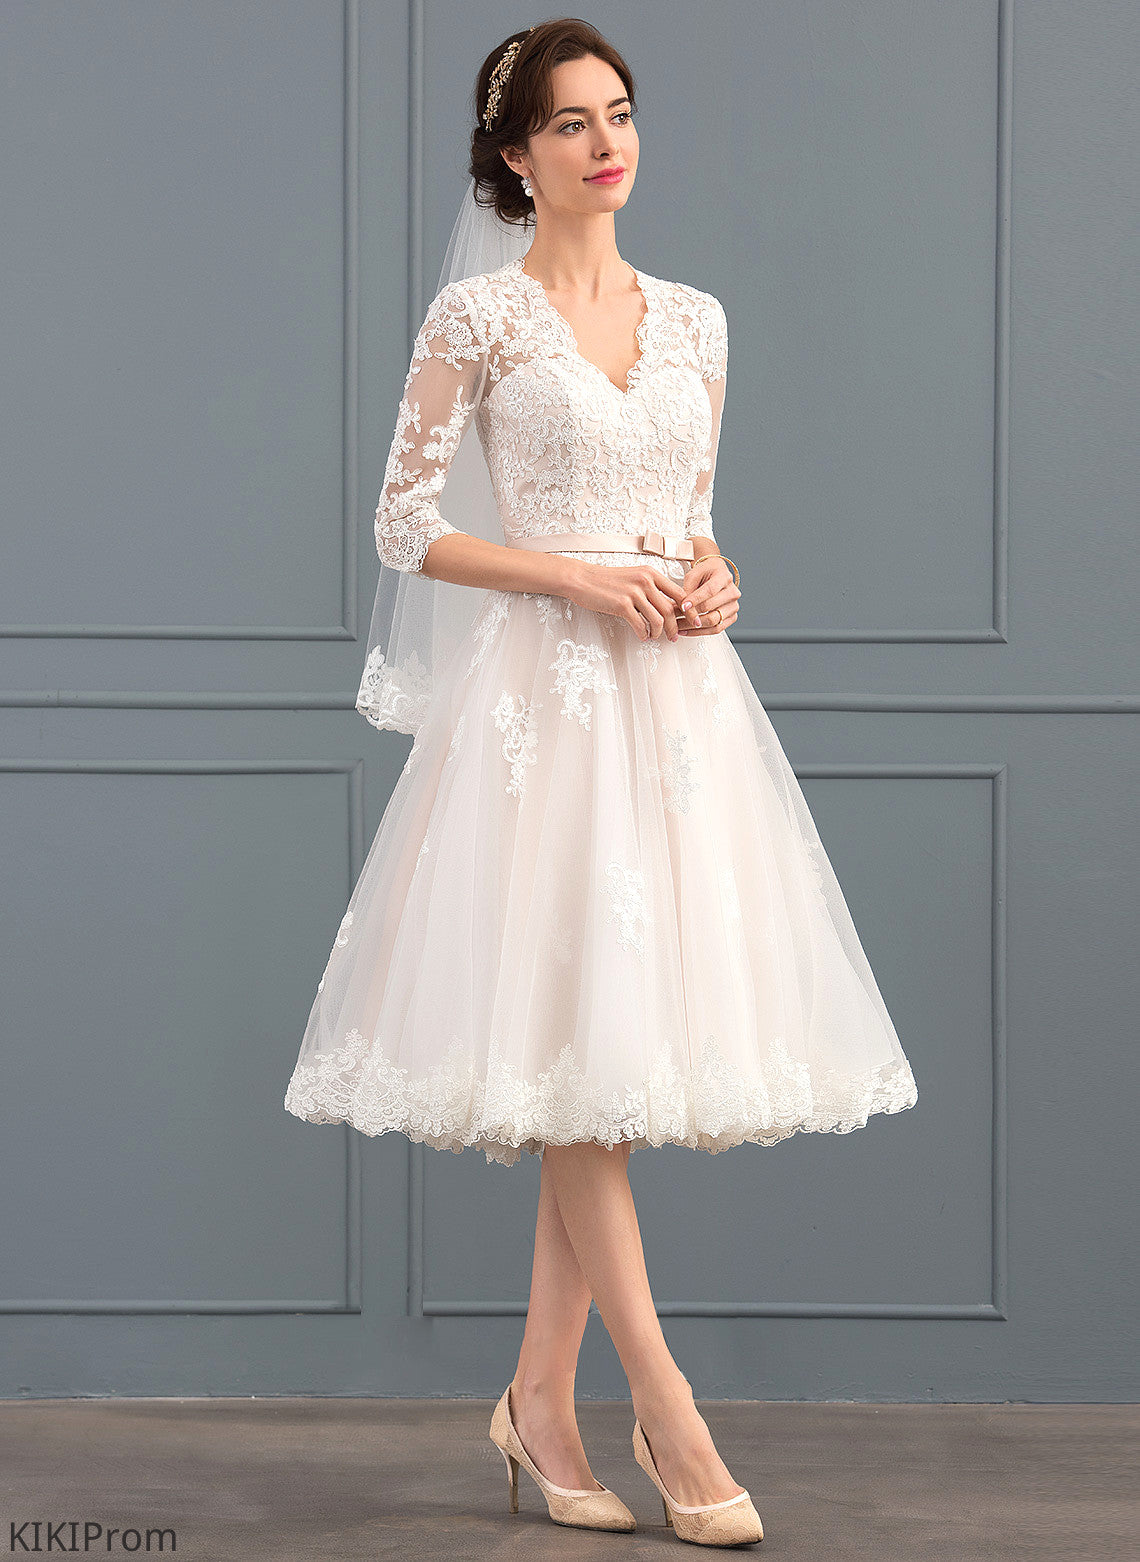 Wedding Bow(s) Knee-Length Wedding Dresses A-Line Abbigail Tulle Dress V-neck With